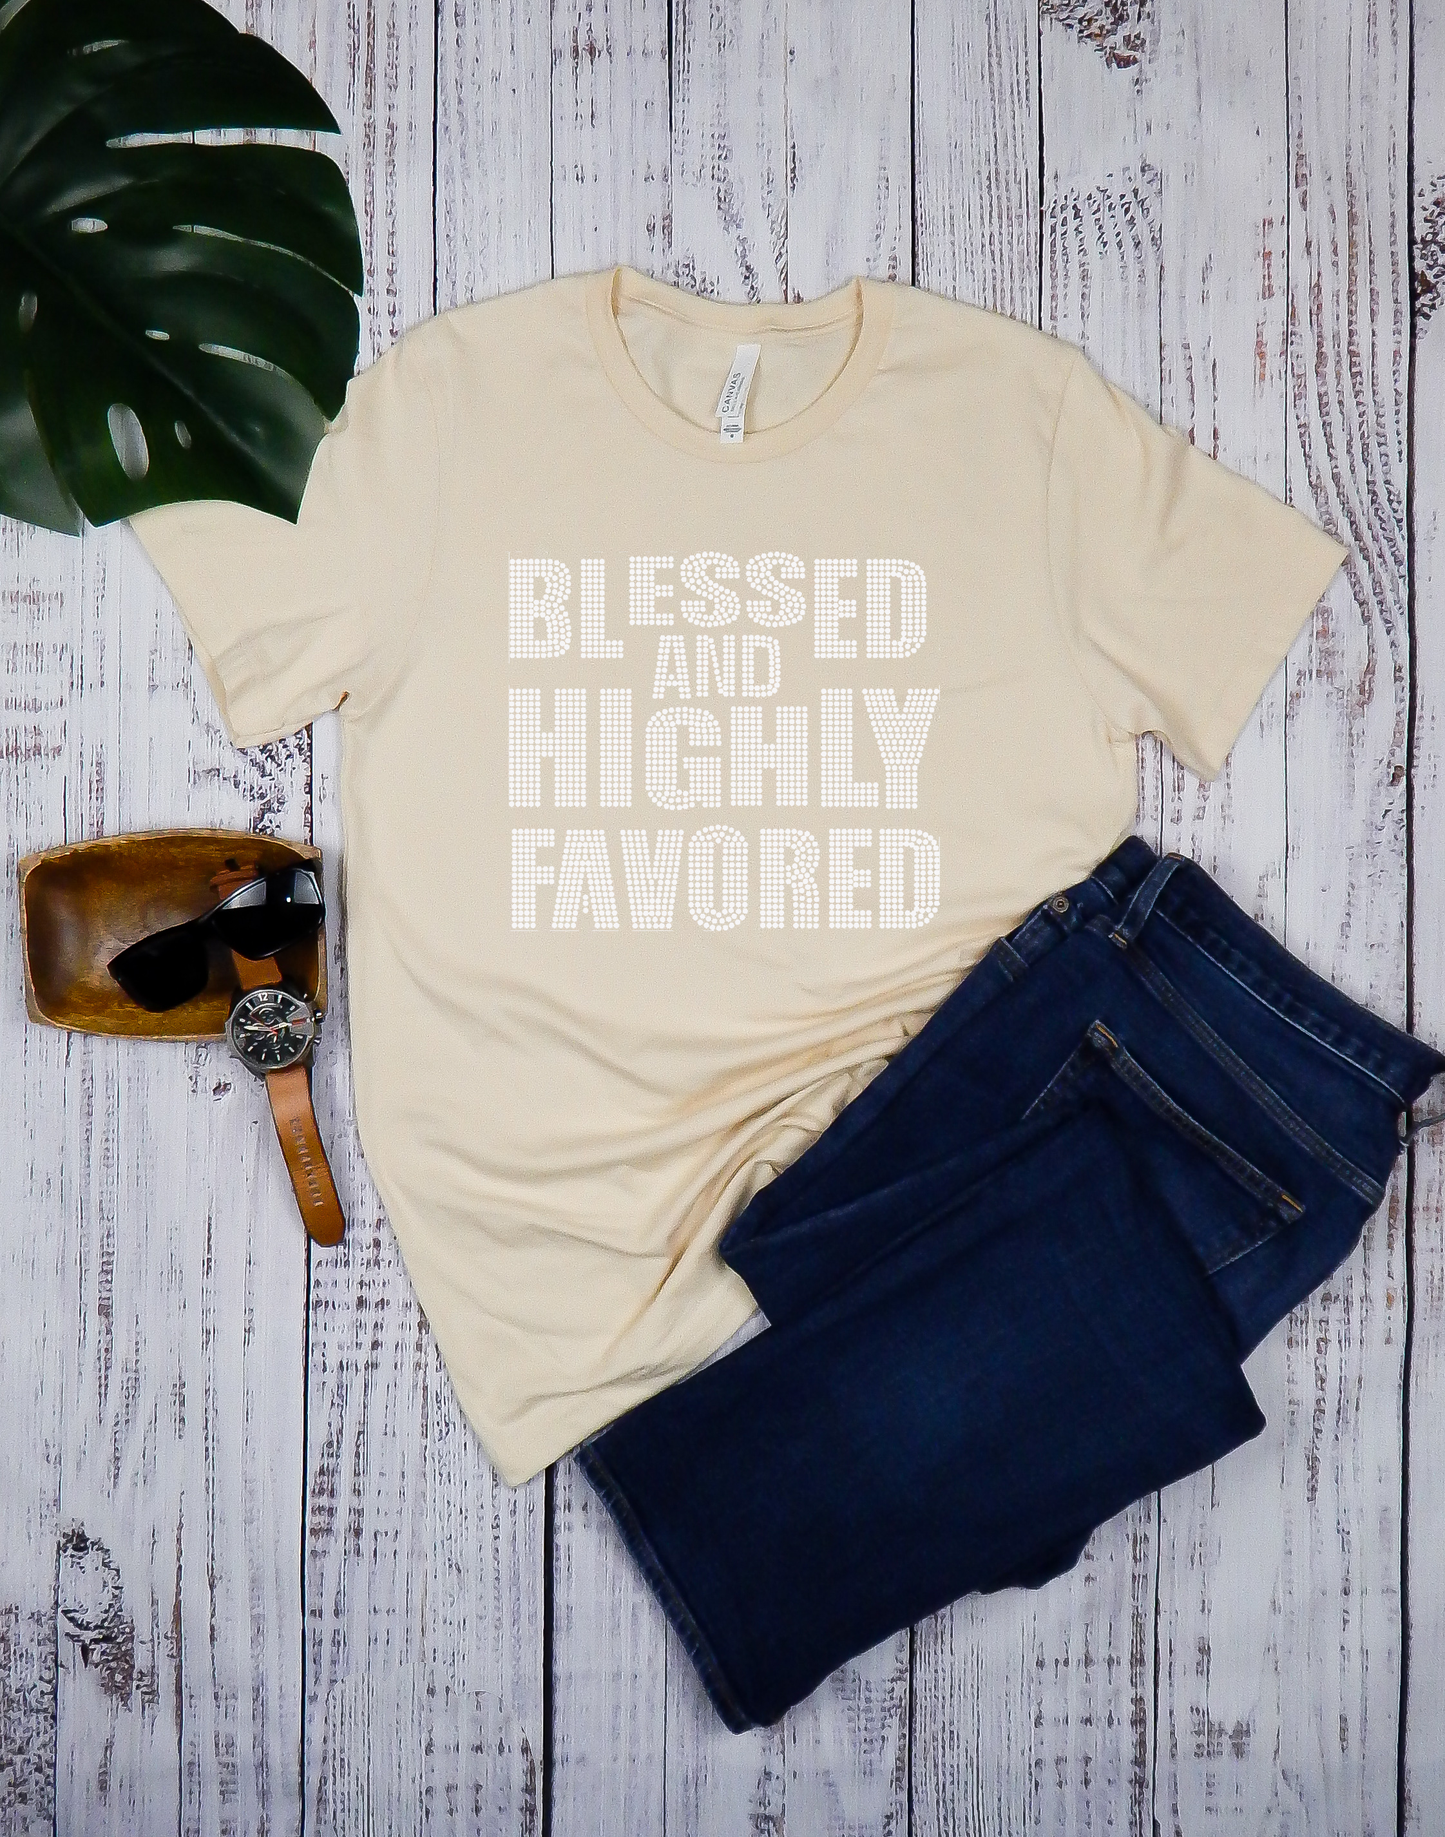 Blessed and Highly Favored Rhinestone T-Shirt